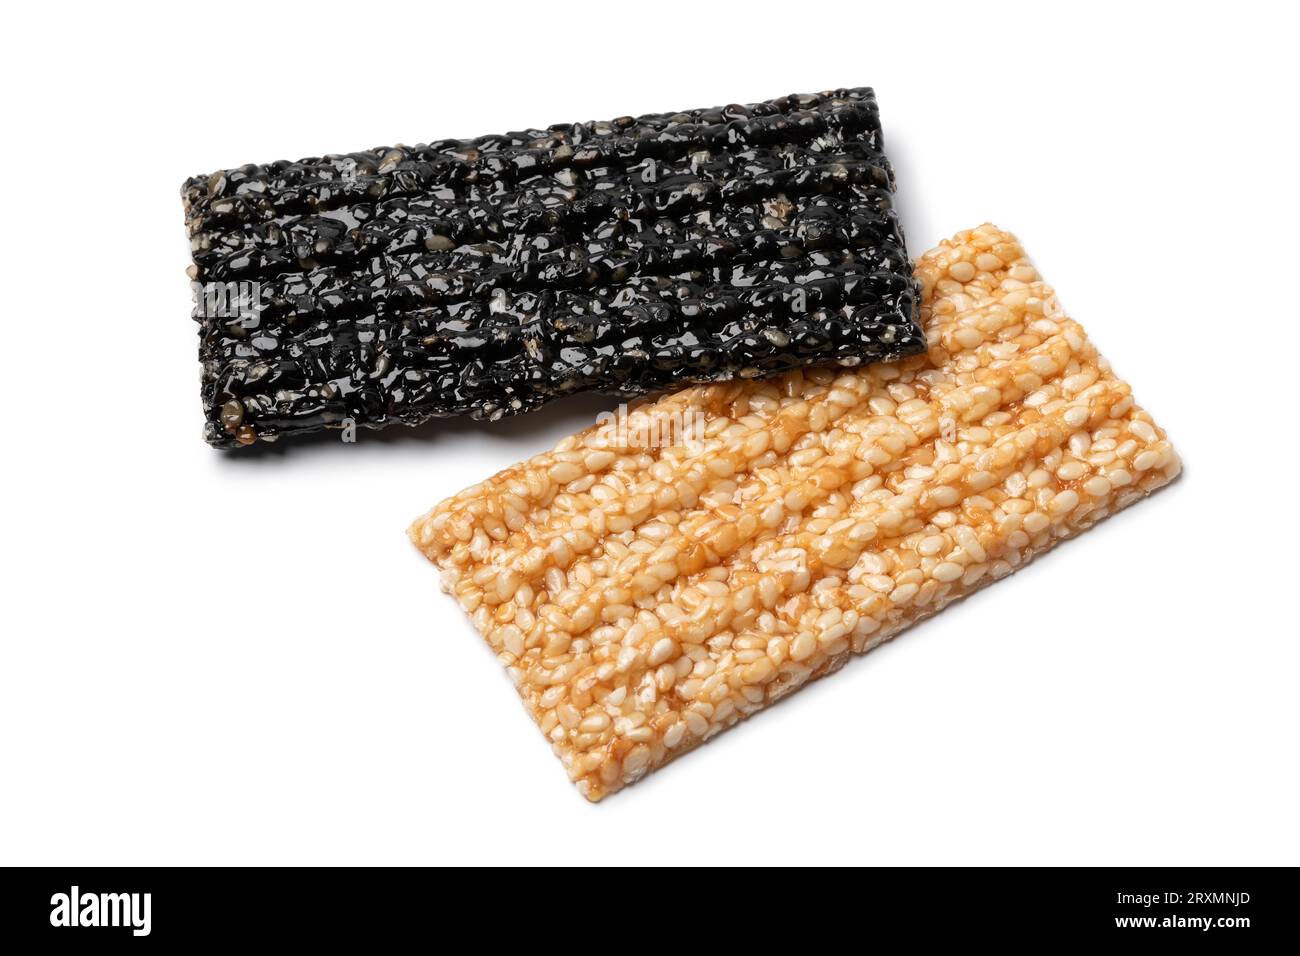 Pair of white and black of sesame snaps isolated on white background close up Stock Photo